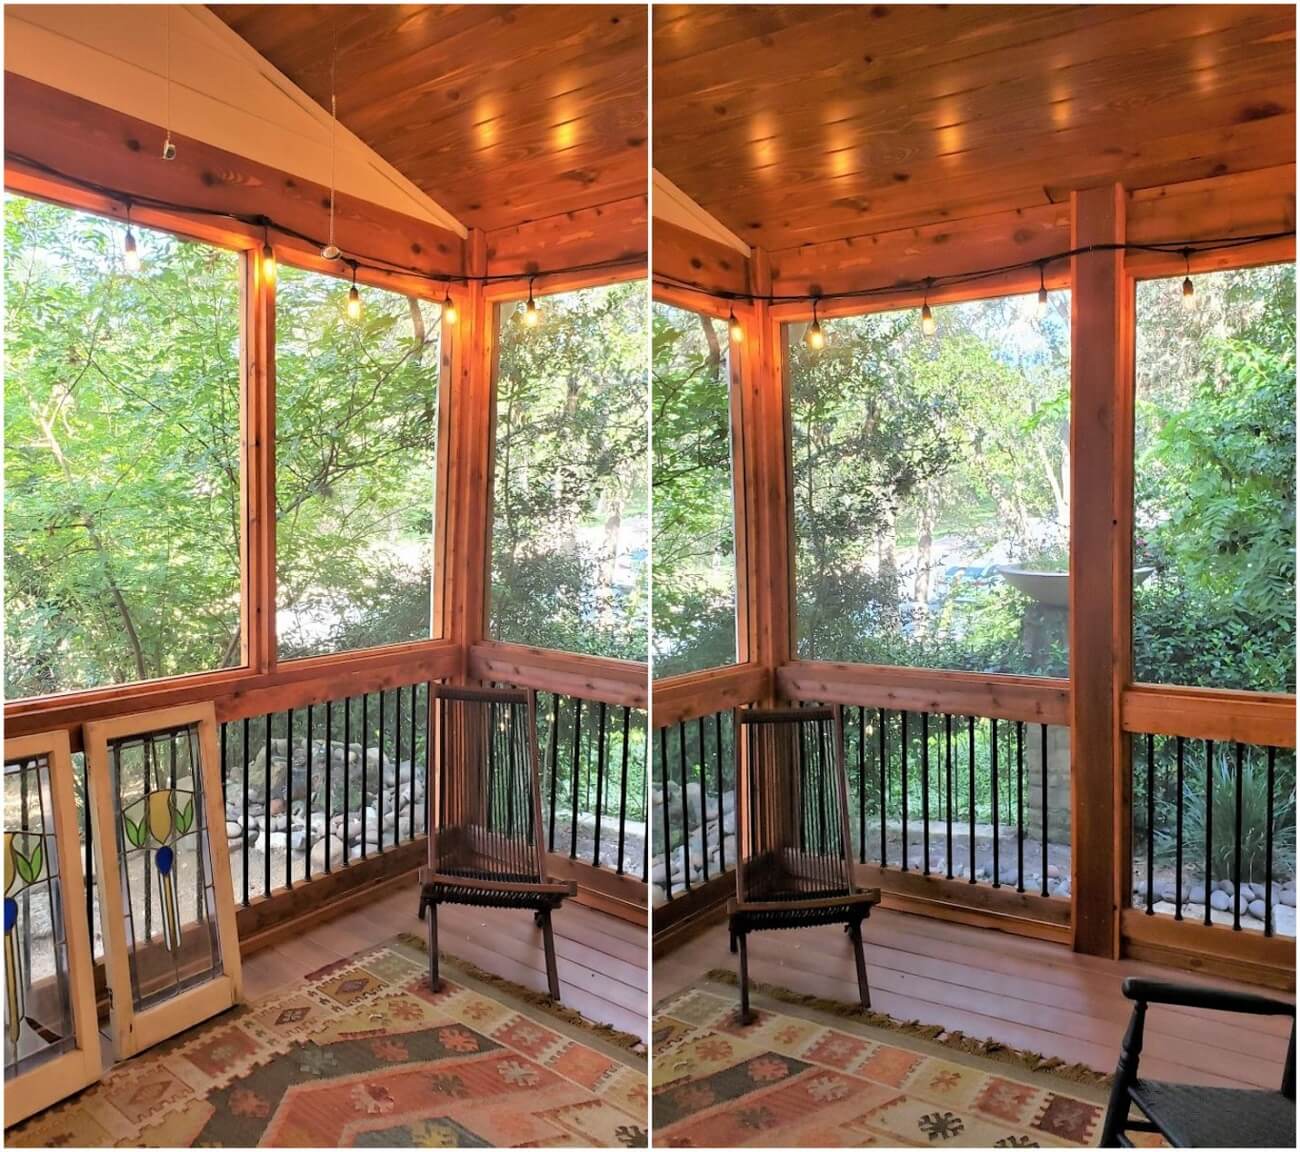 New screened porch interior view